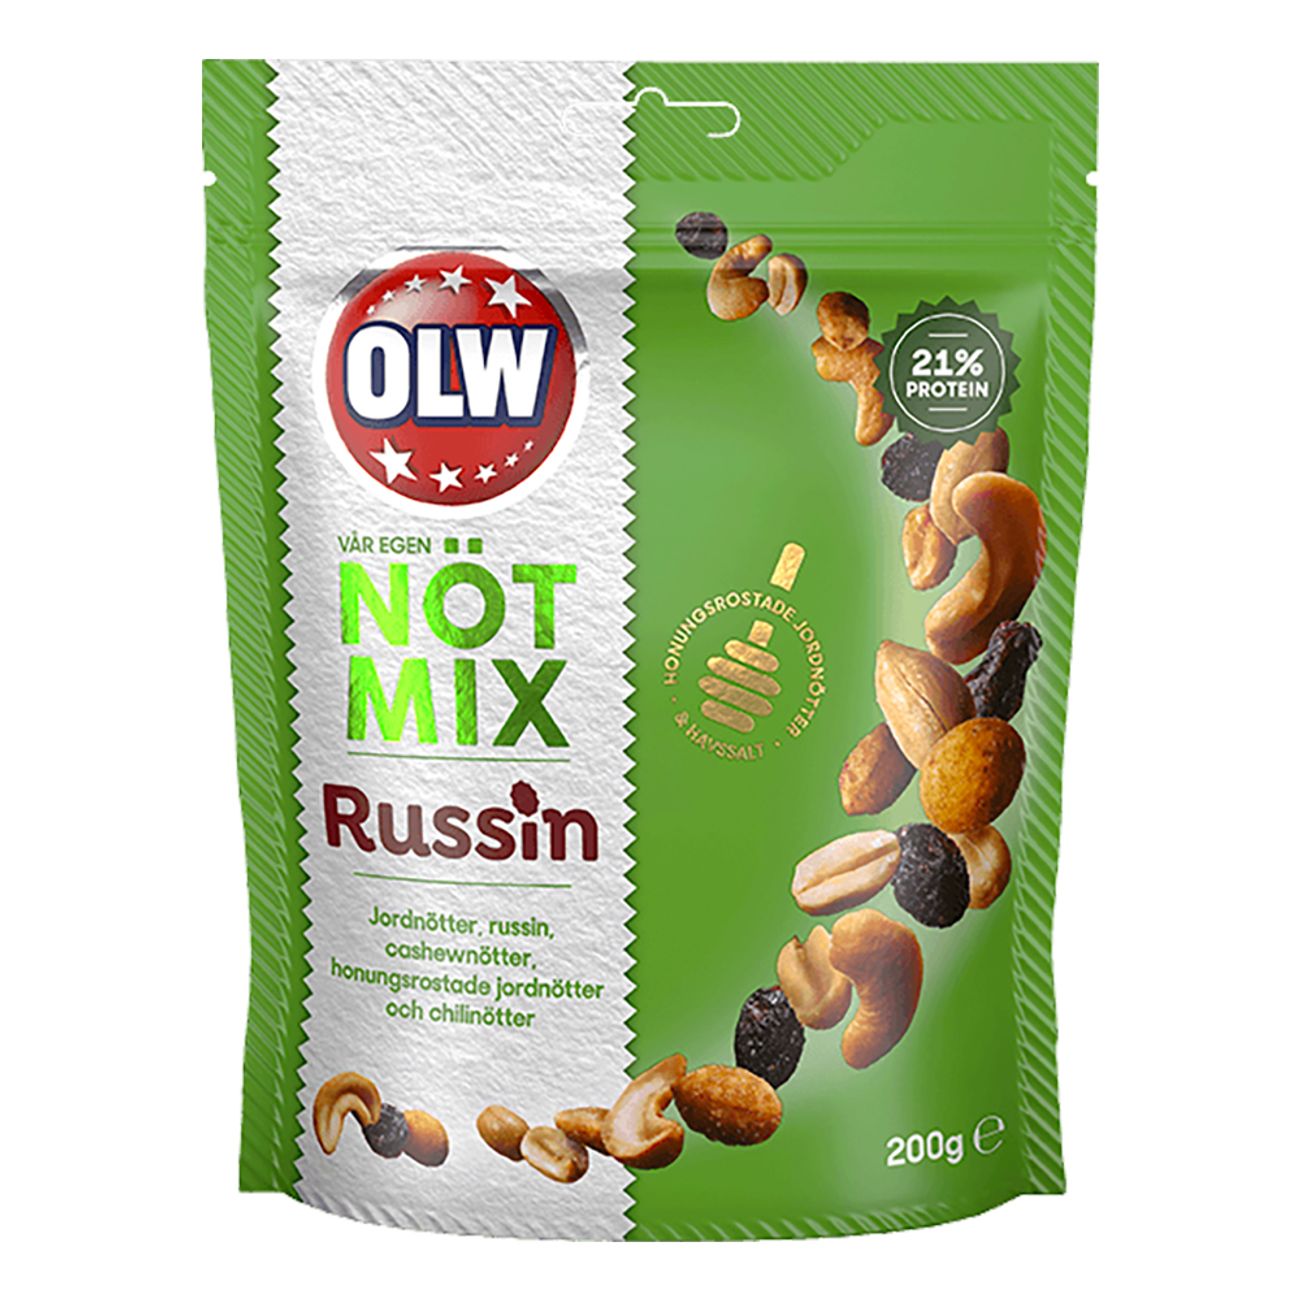 olw-notmix-russin-82515-1